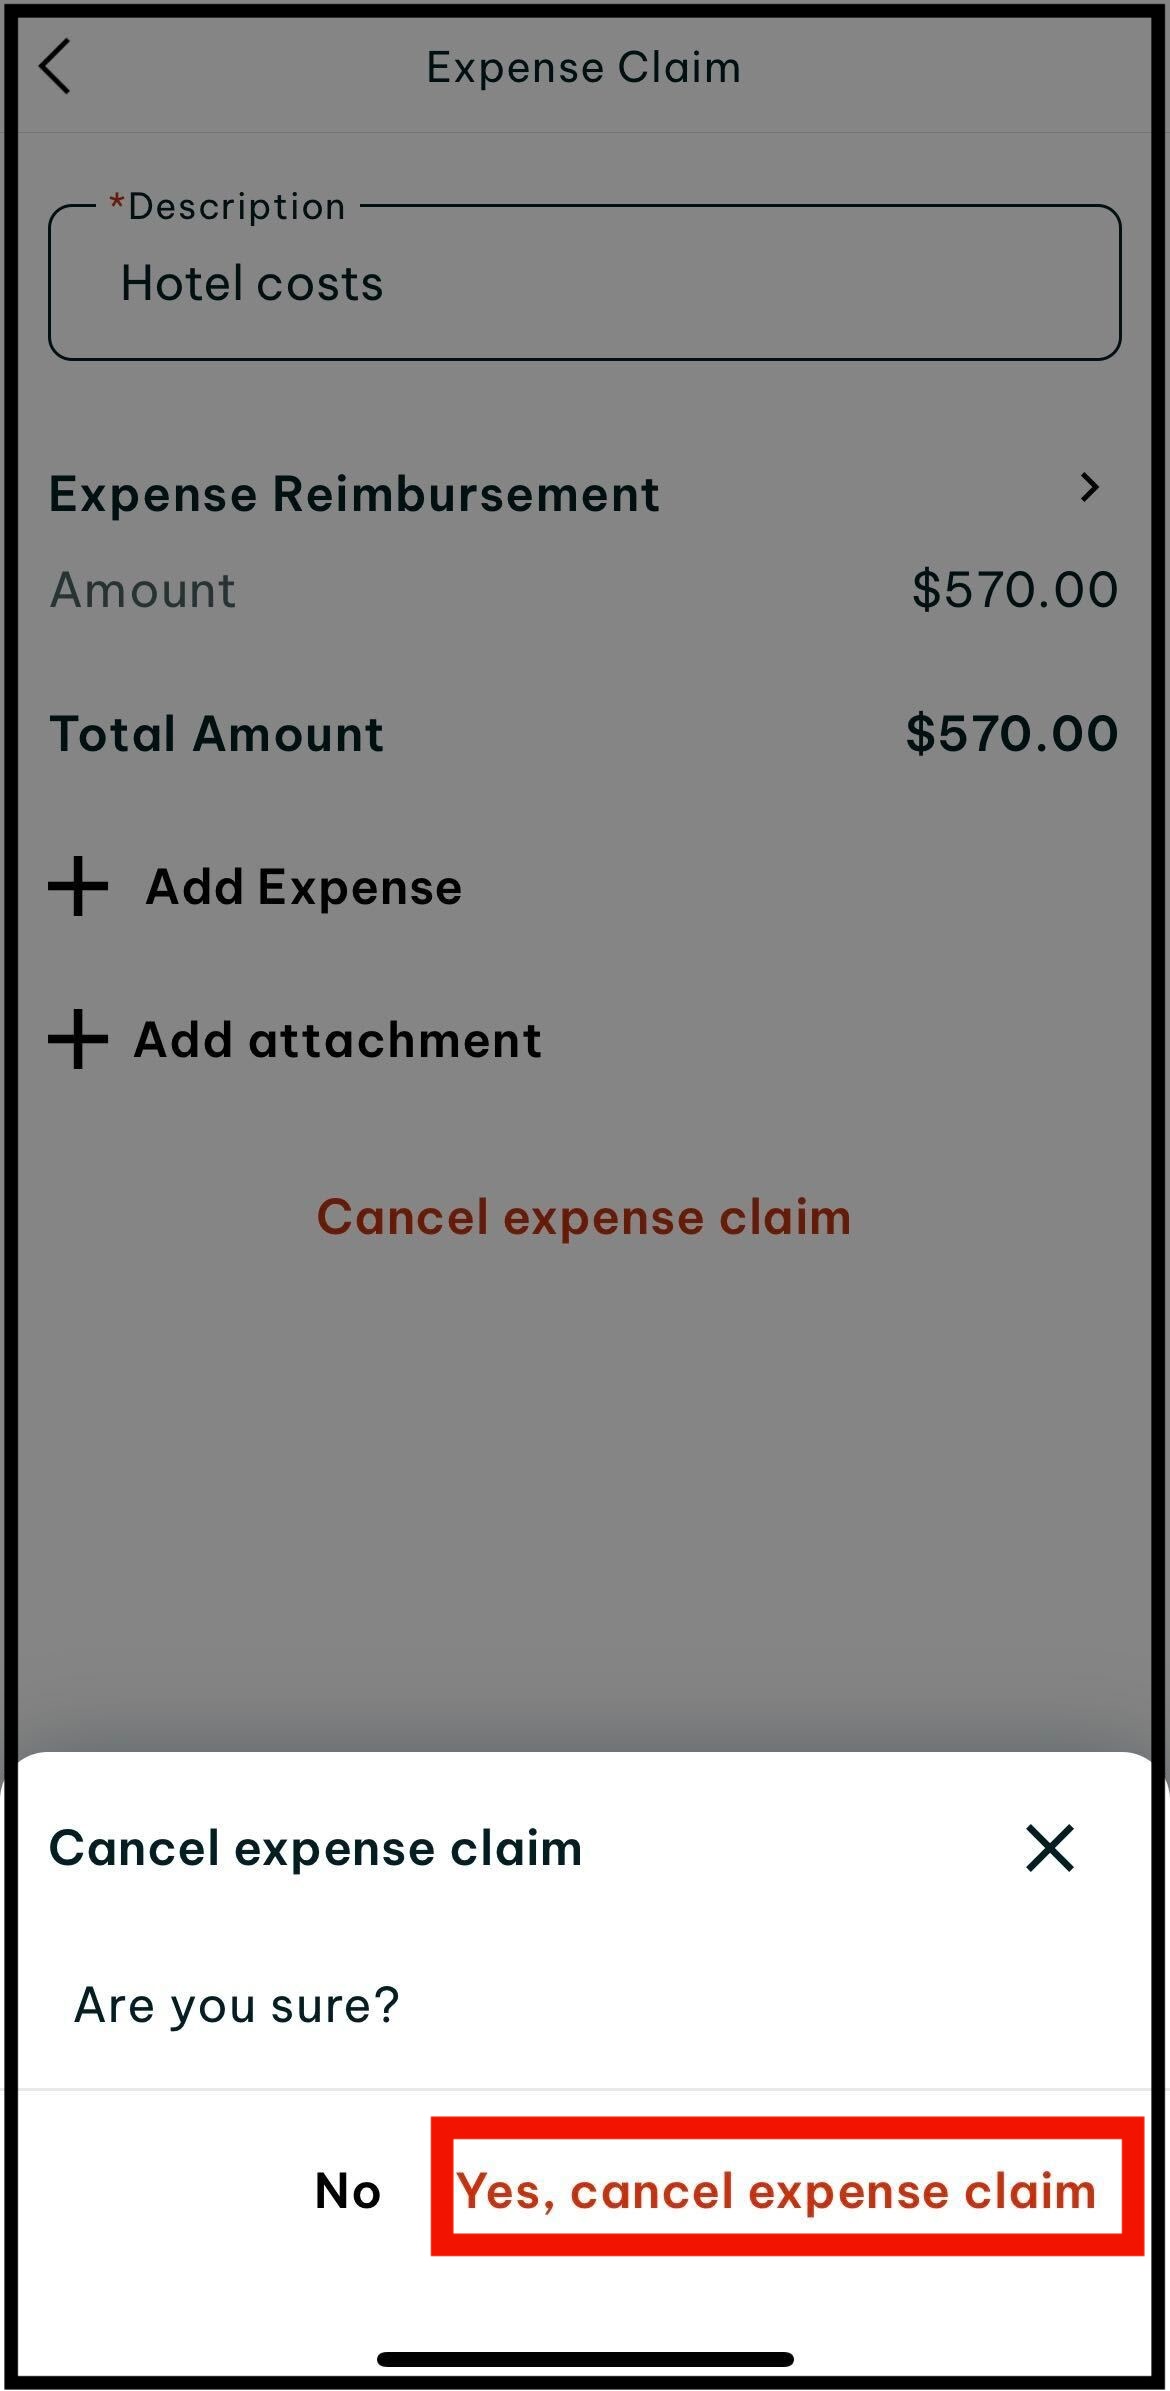 tap yes cancel expense claim